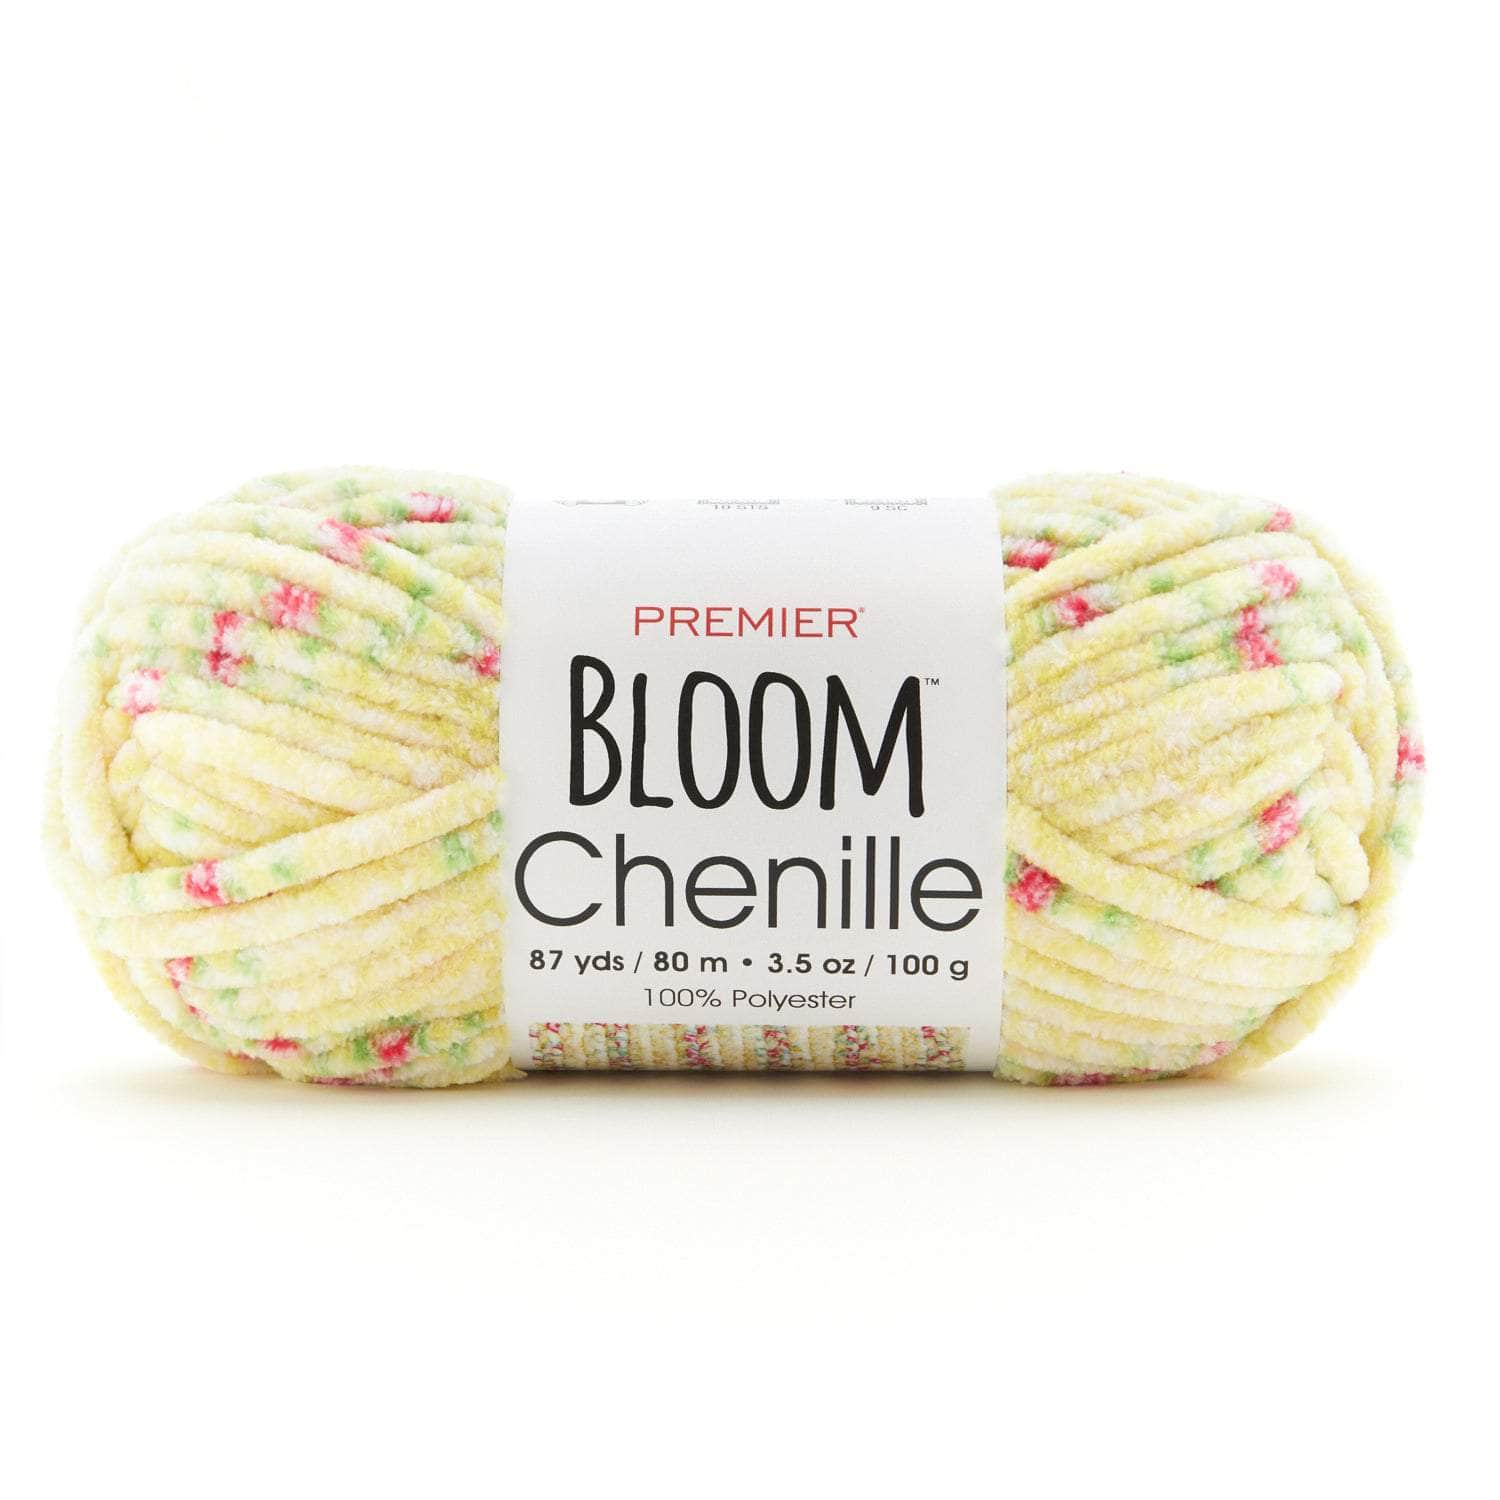 Save on Bloom, Anti-Pilling Butterfly, and more! - Premier Yarns